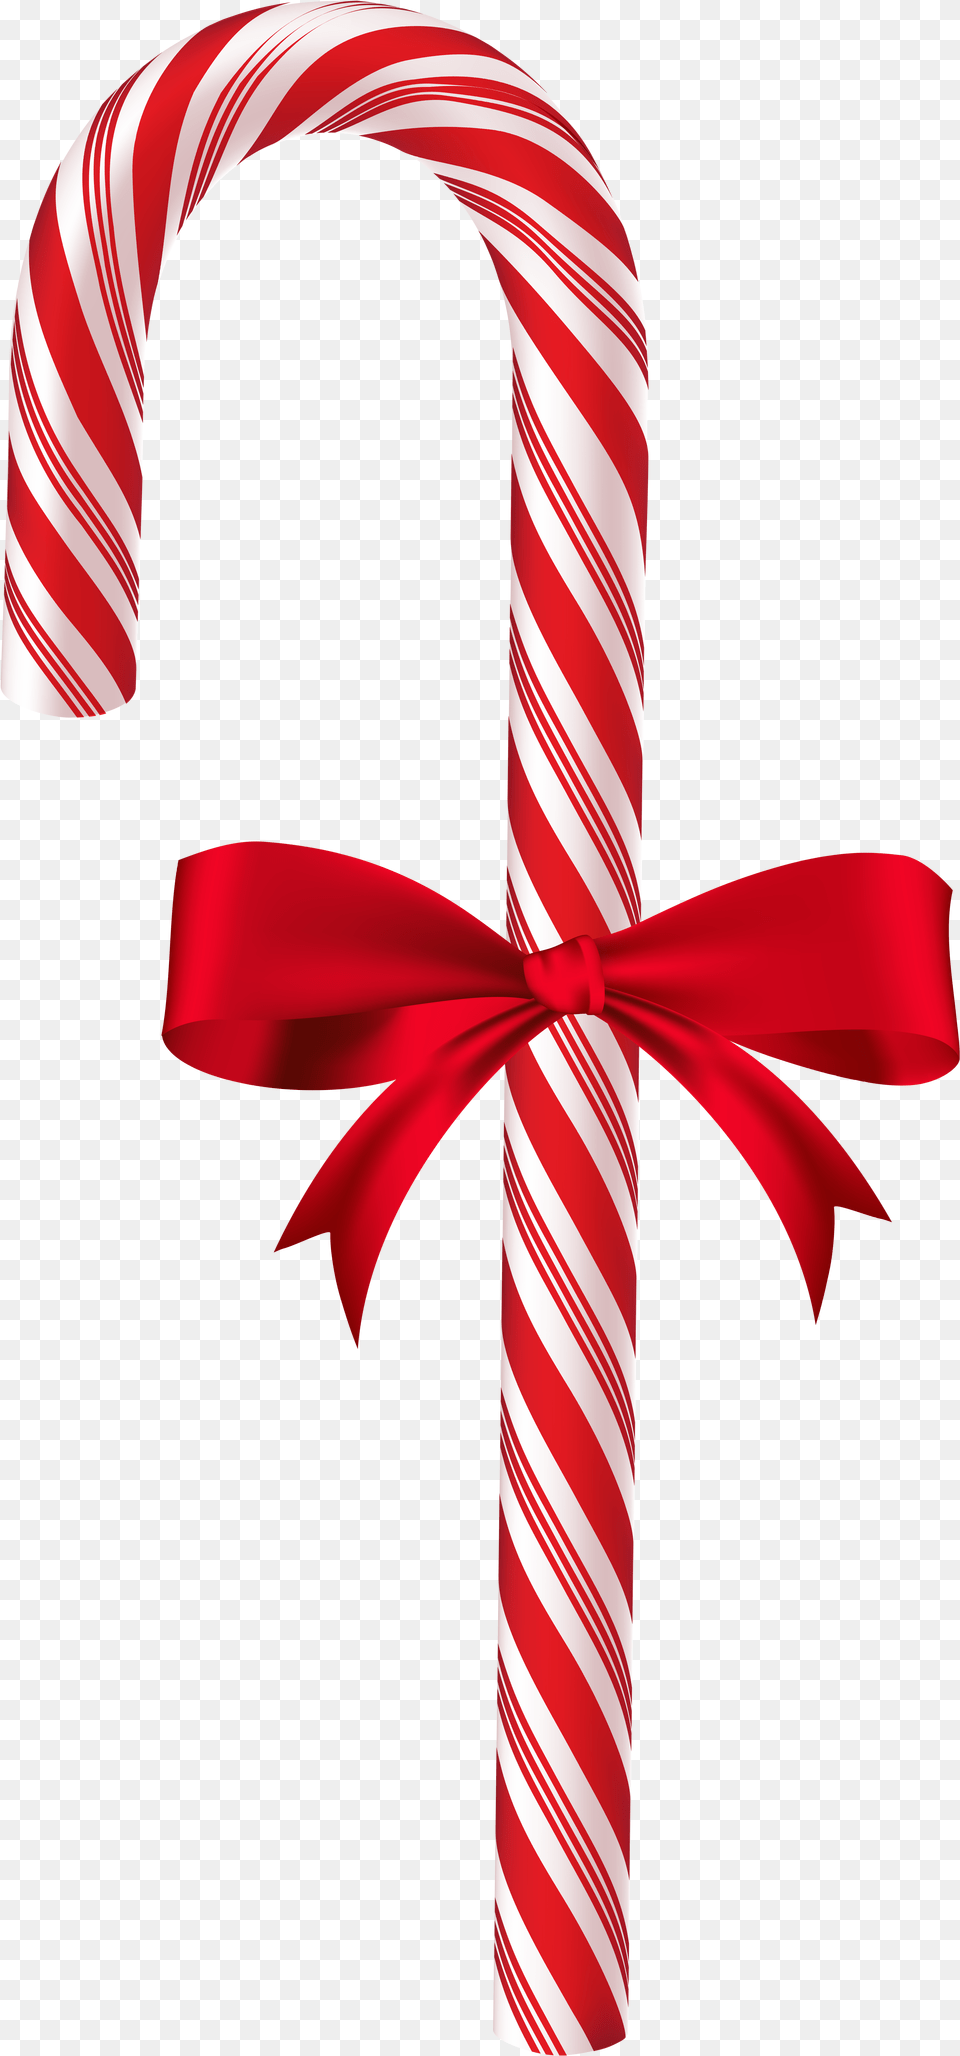 Candy Cane Background Transparent Candy Cane, Food, Sweets, Stick, Cross Free Png Download